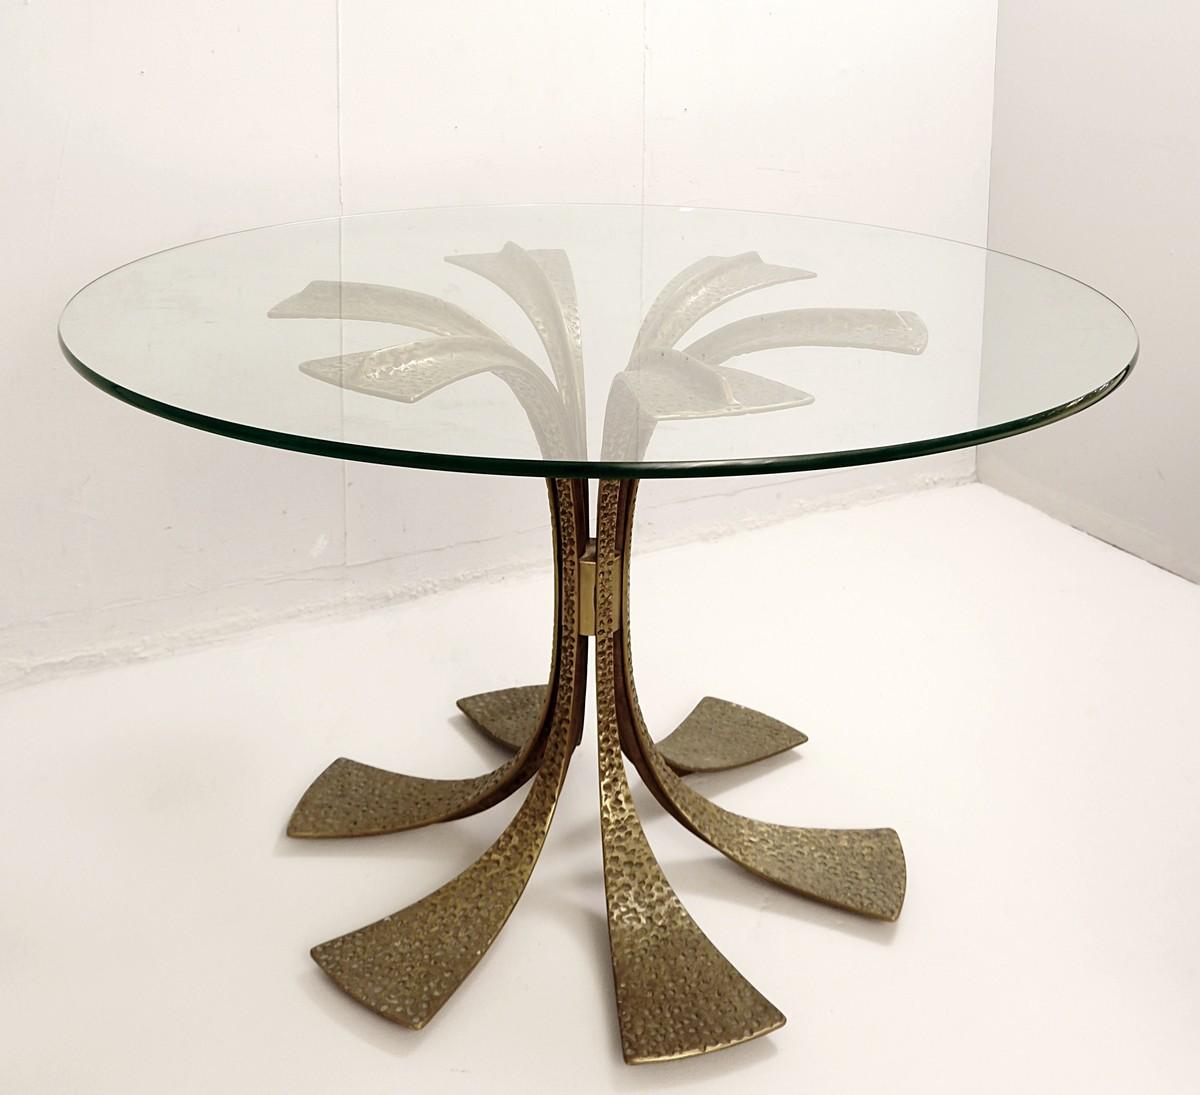 Hammered brass dining table by Luciano Frigerio, 1980s.